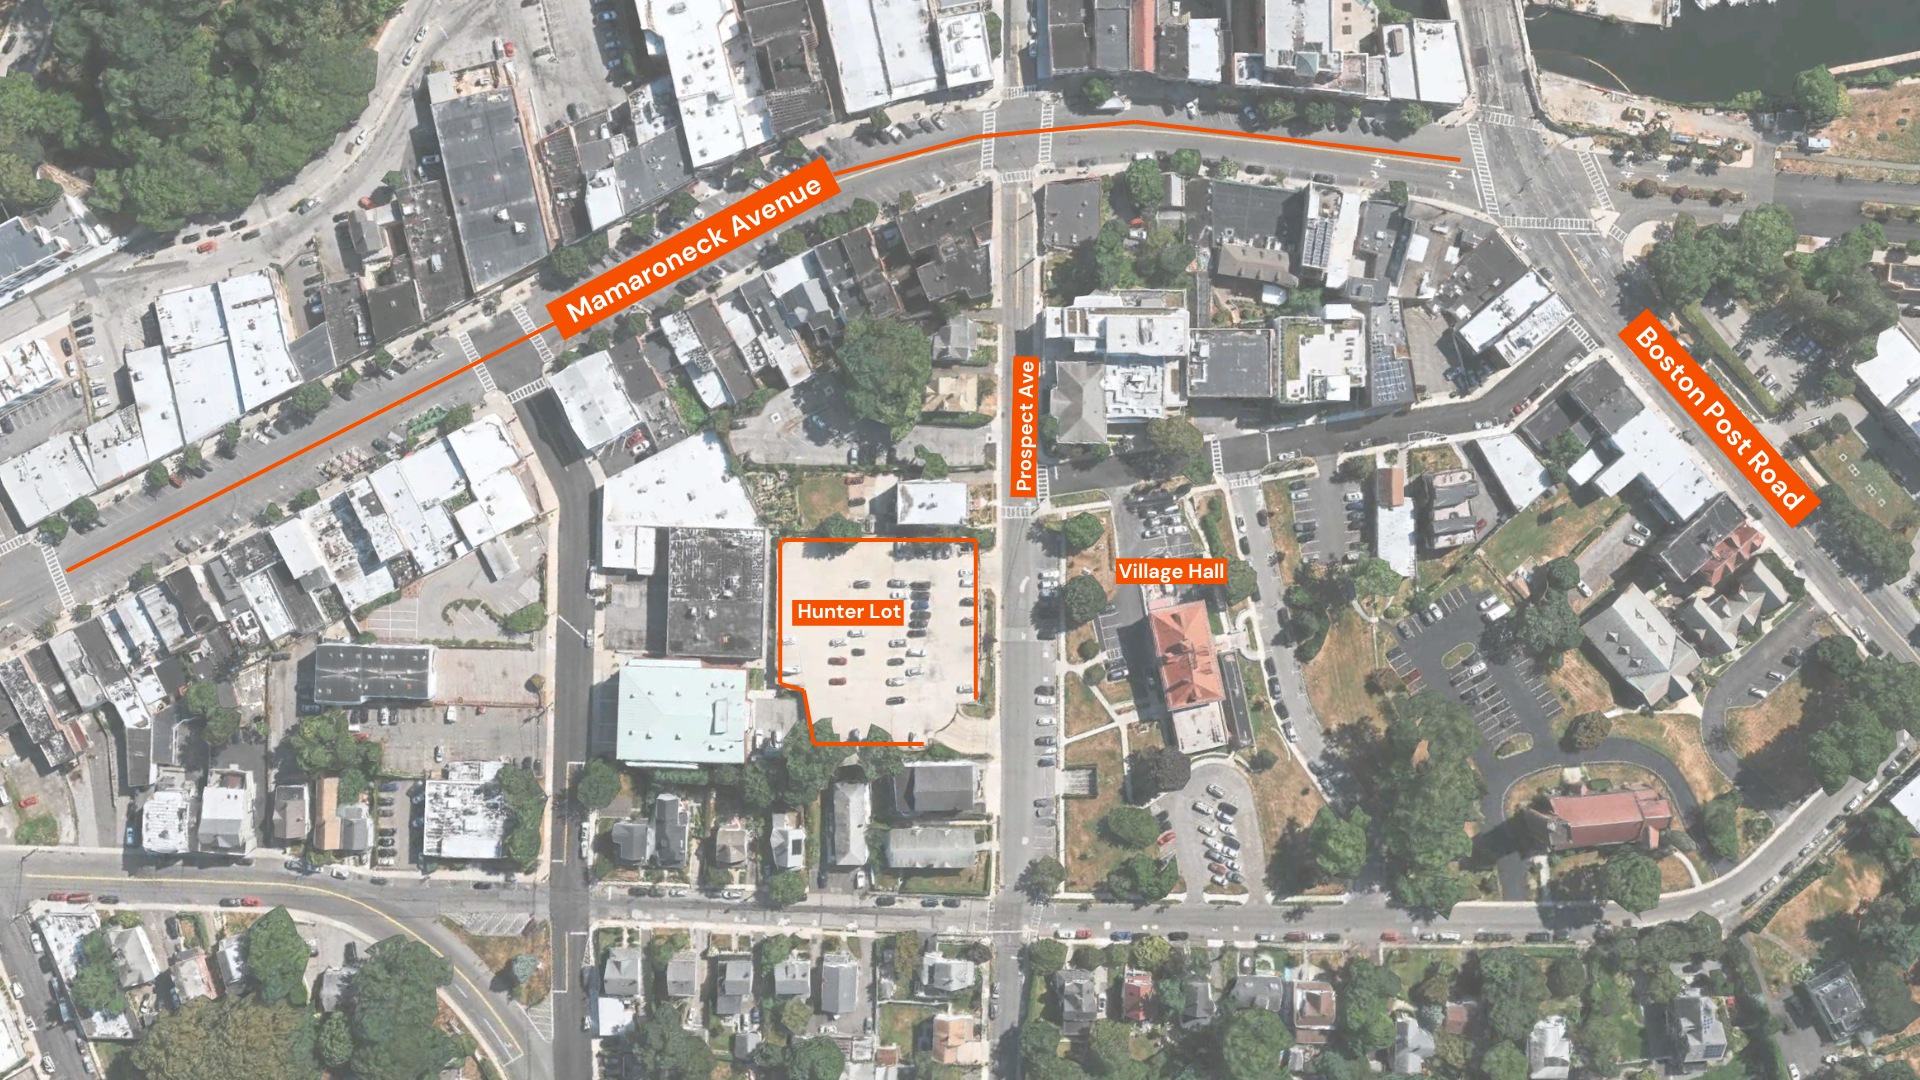 A map of the area surrounding the Hunter Lot, Mamaroneck Avenue, and the Village of Mamaroneck Hall.